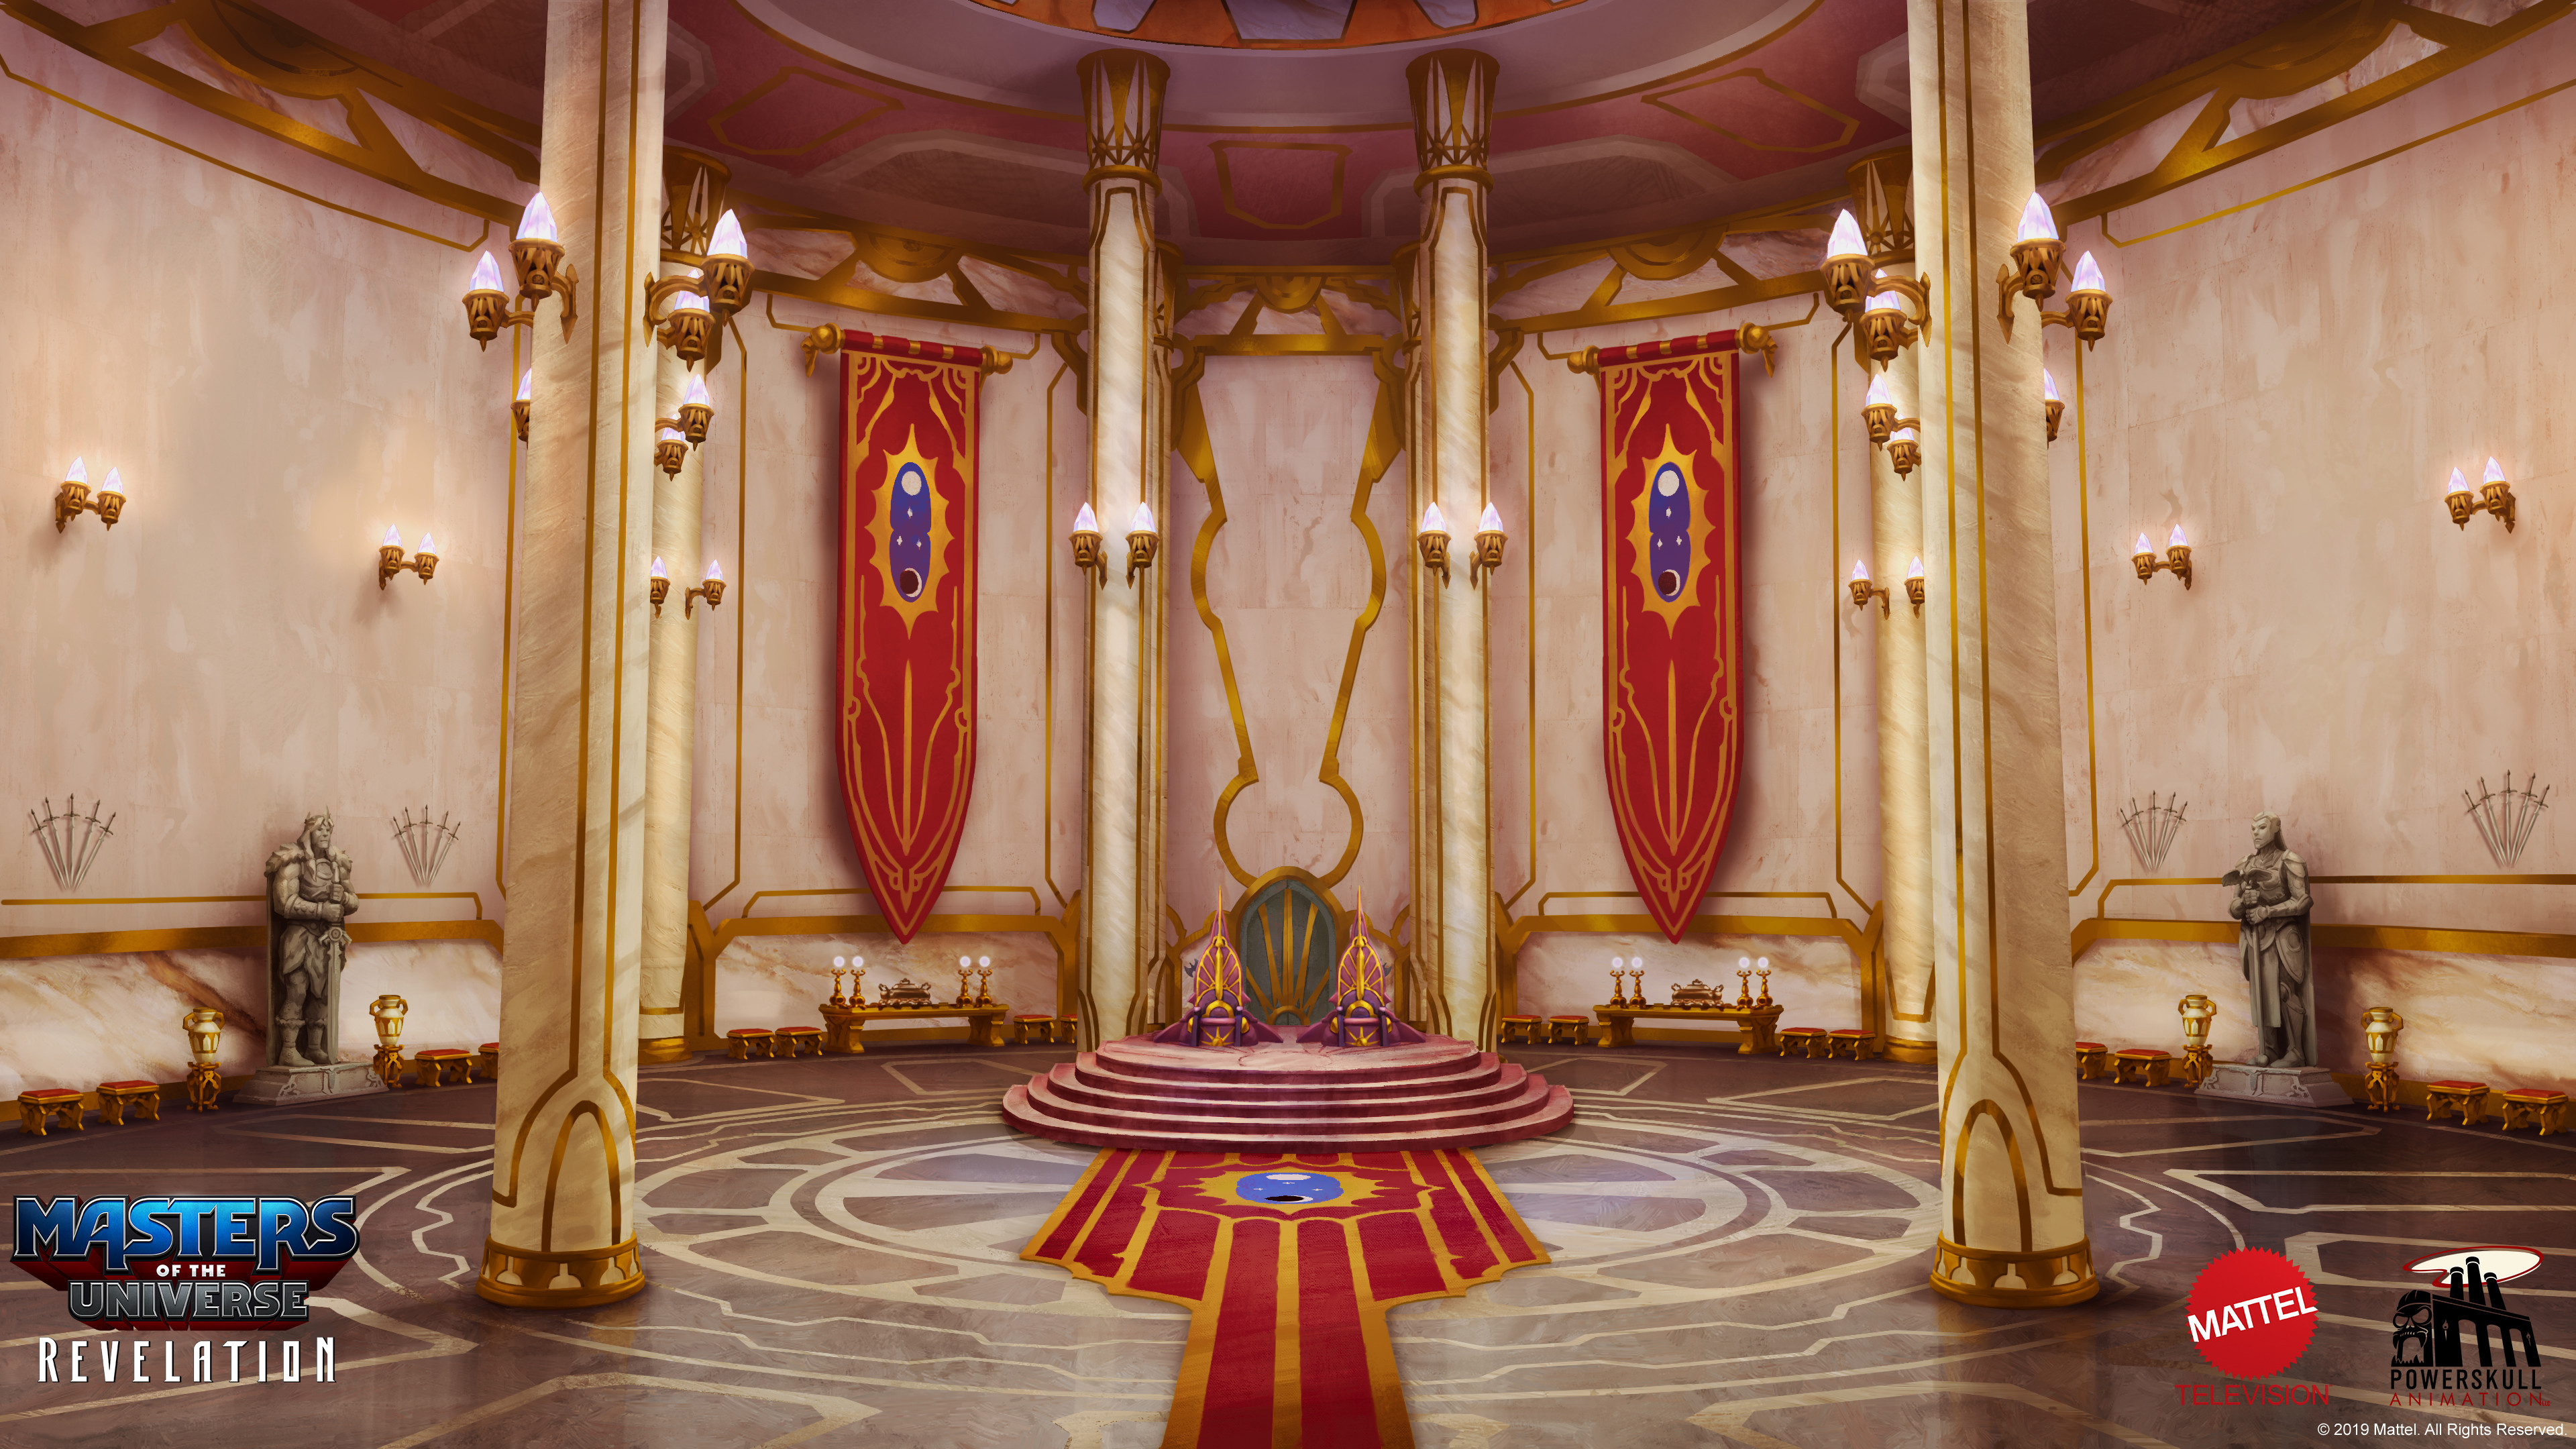 HD wallpaper featuring the majestic throne room from Masters of the Universe: Revelation, with ornate columns, grand banners, and an iconic central throne.